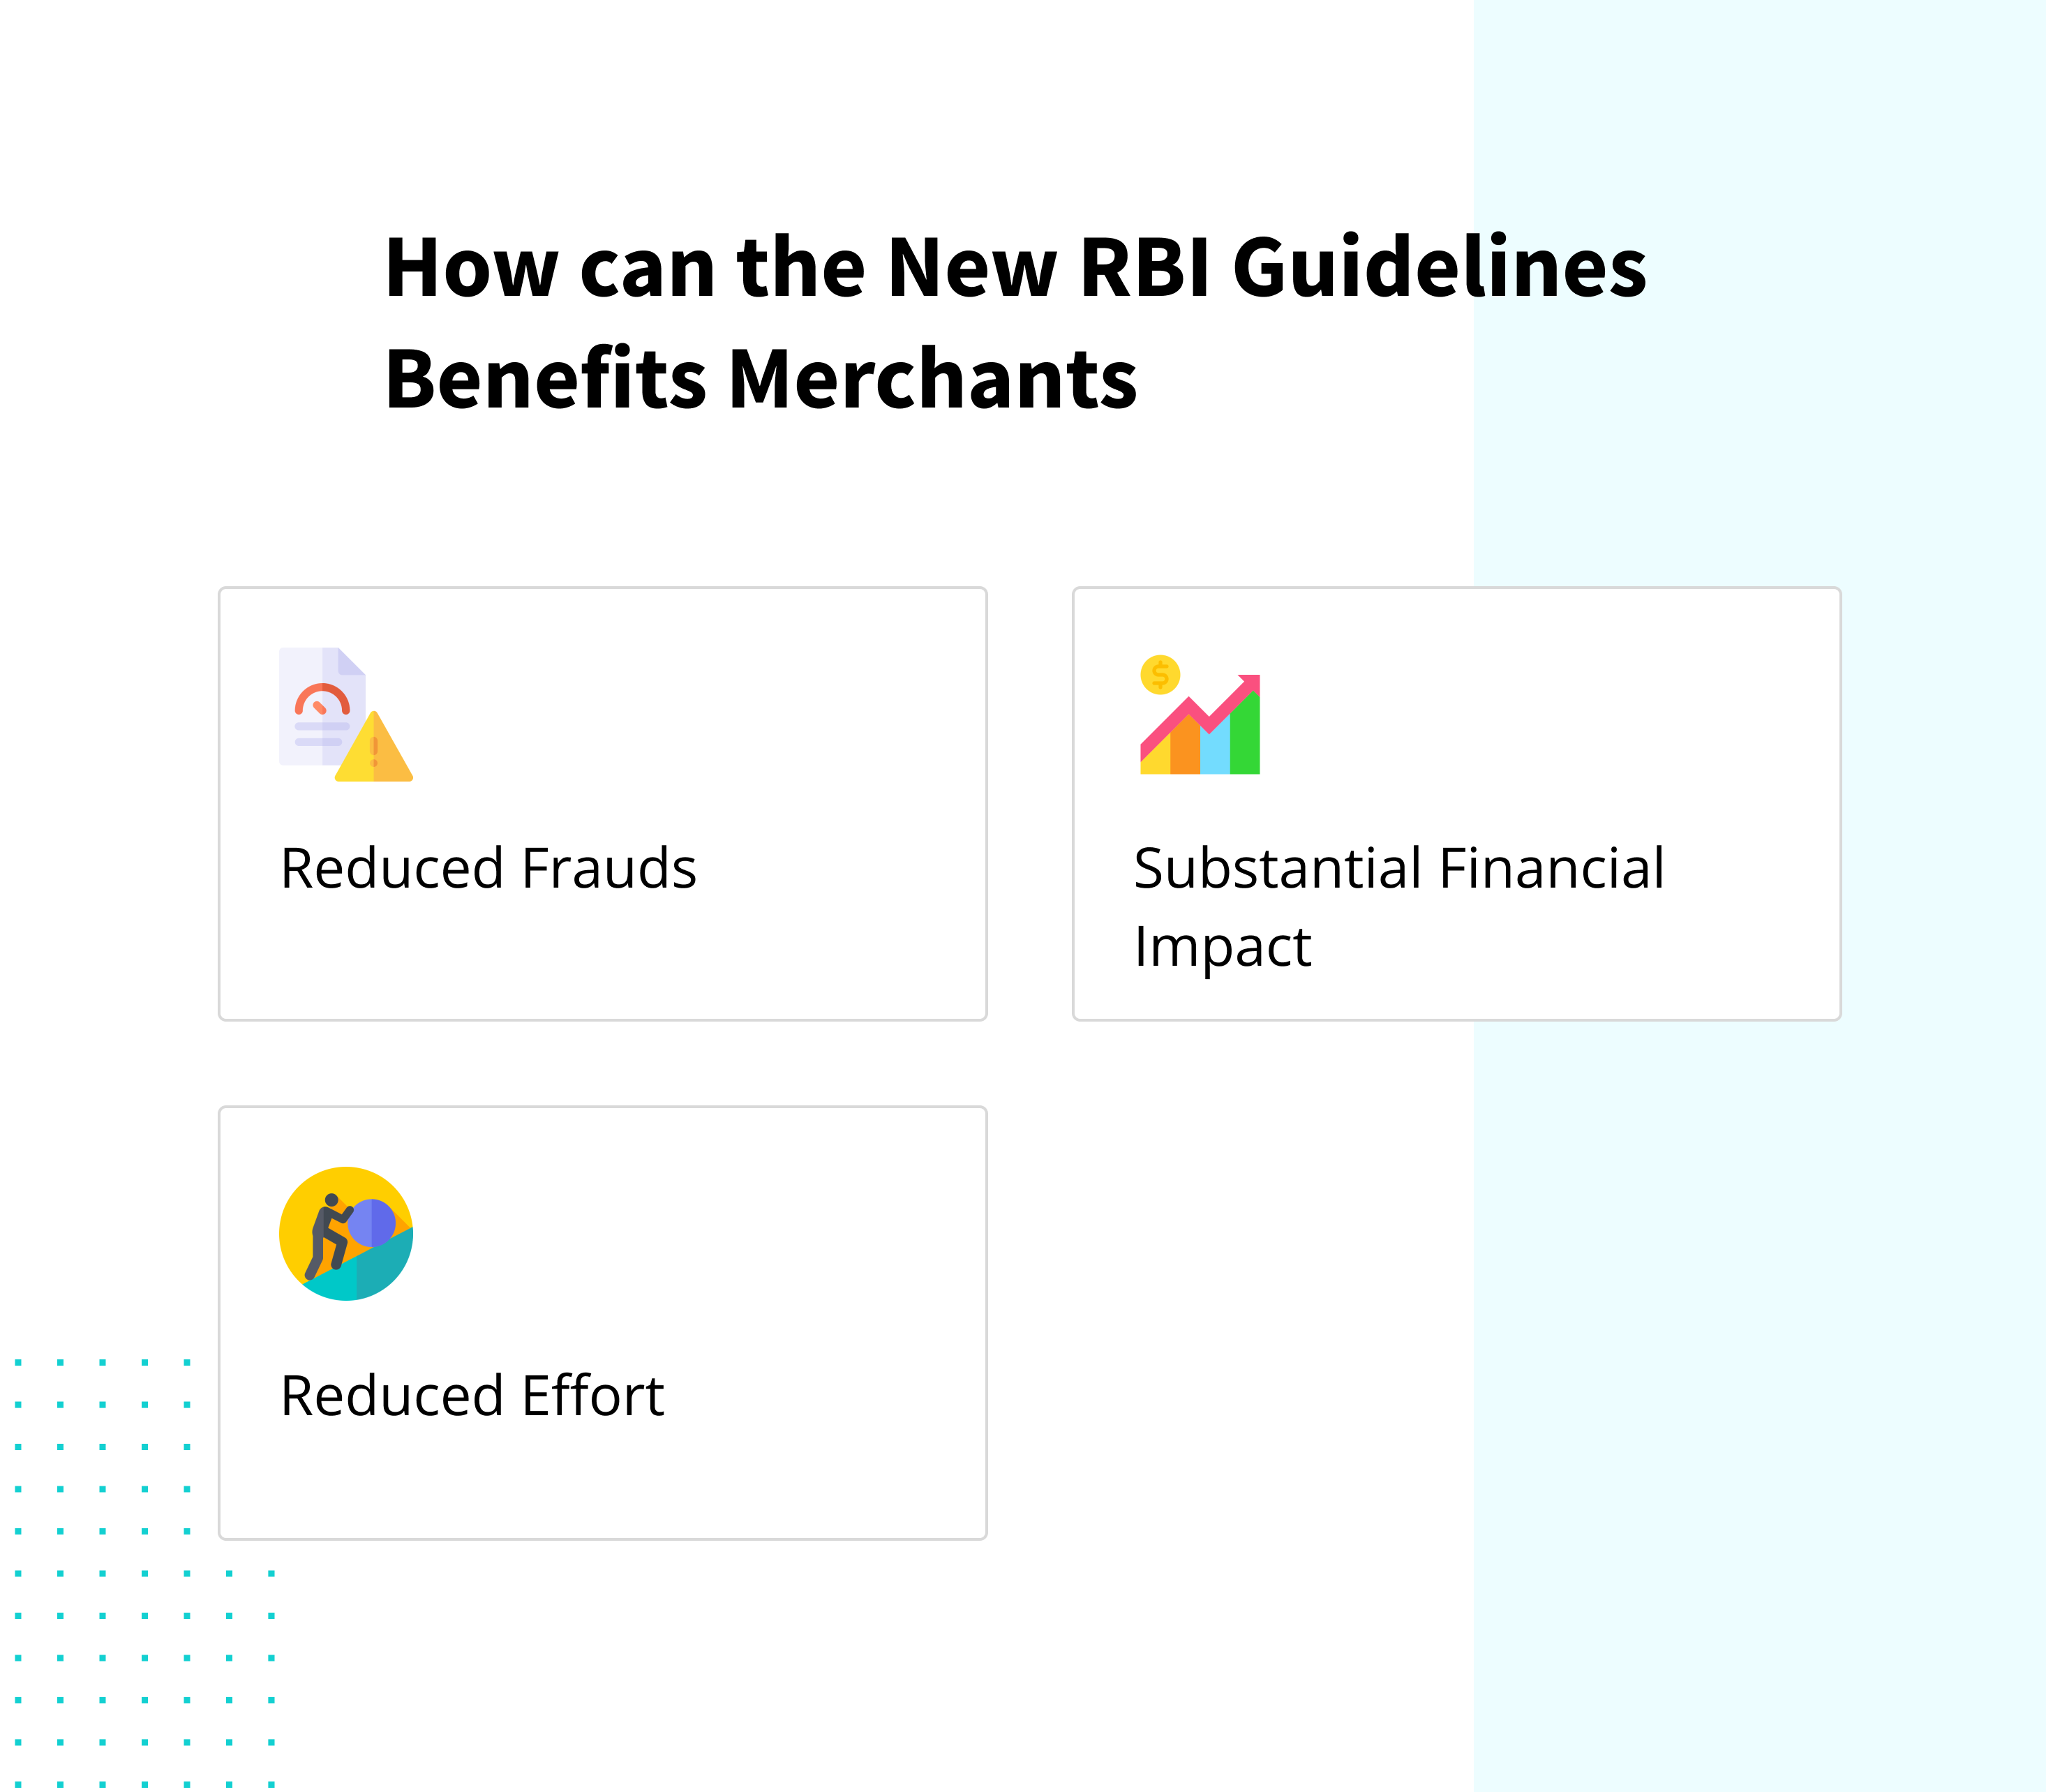 How can the New RBI Guidelines Benefits Merchants